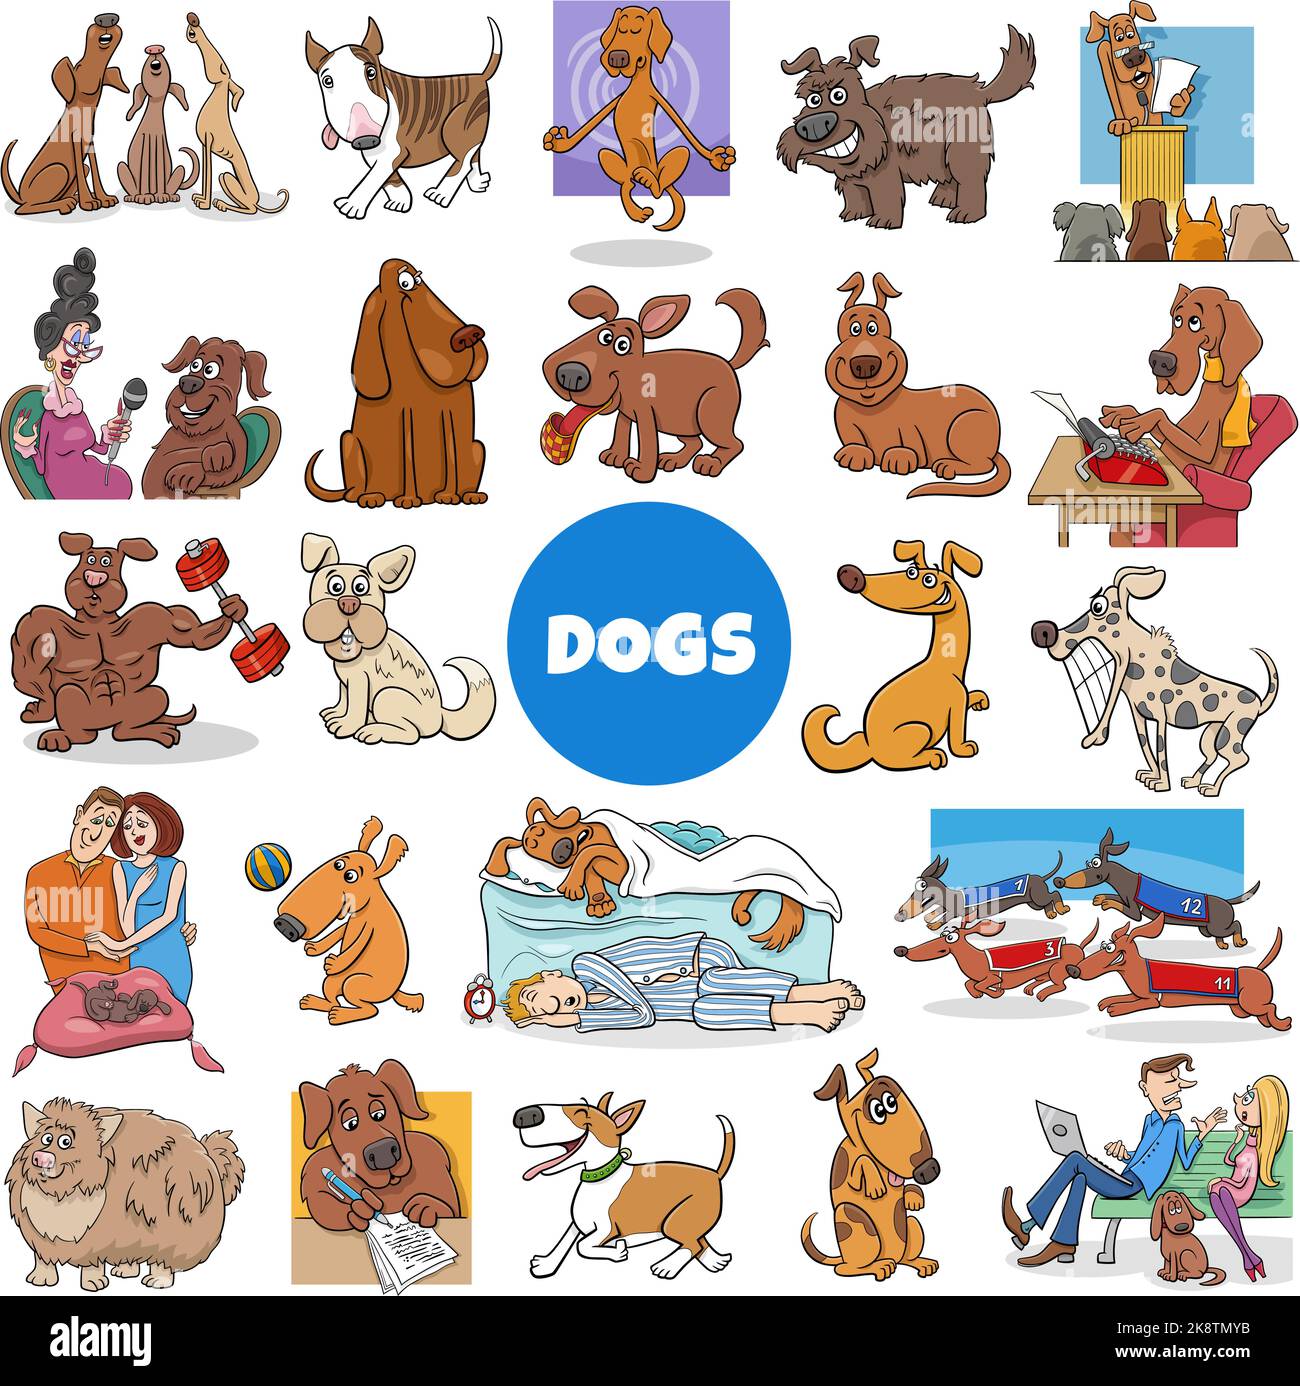 Cartoon illustration of dogs and puppies comic animal characters big set Stock Vector